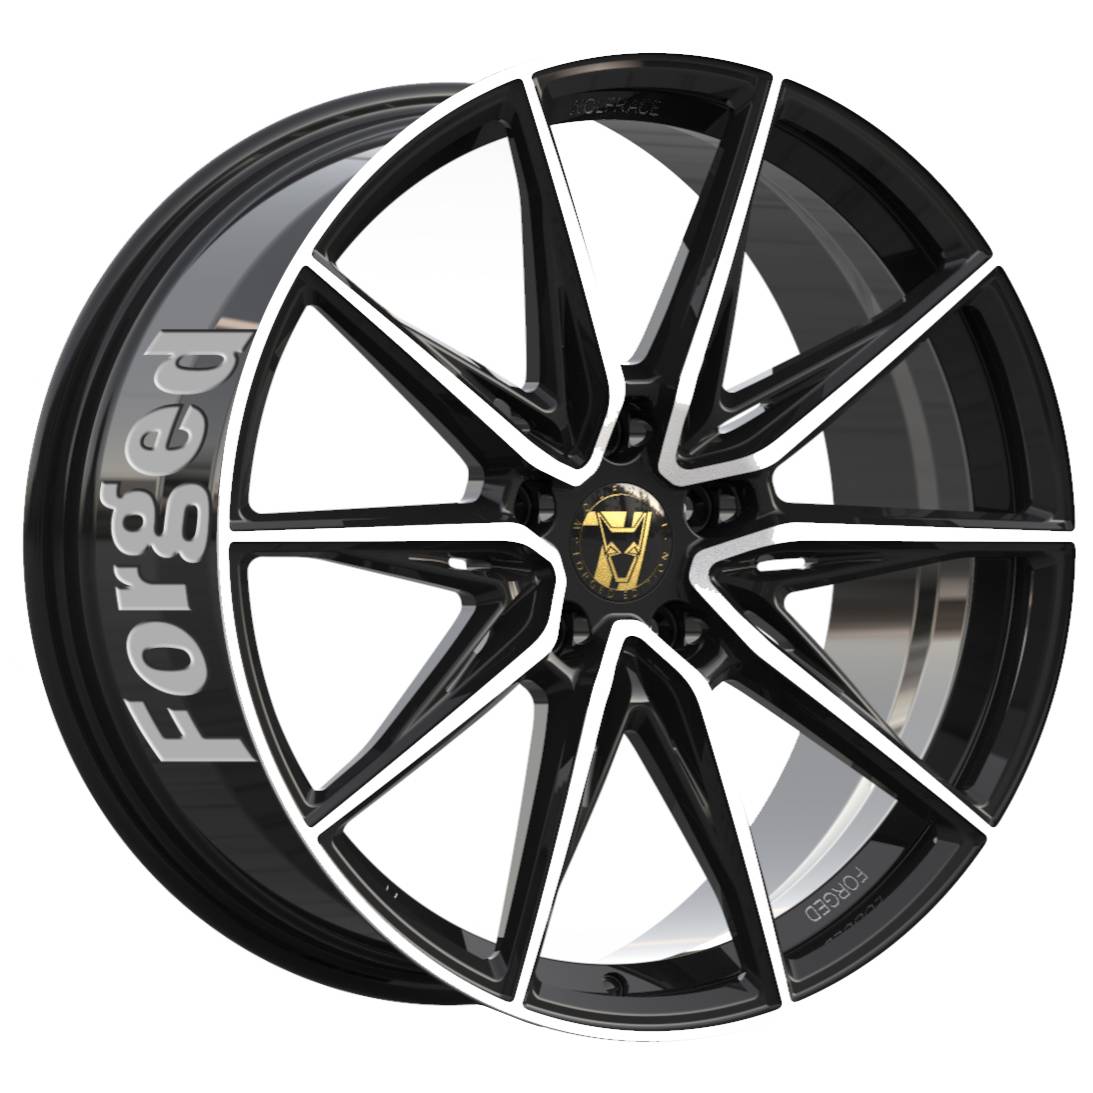 Demon Wheels 71 Forged Edition Urban Racer Forged [10x23] -5x108- ET 20